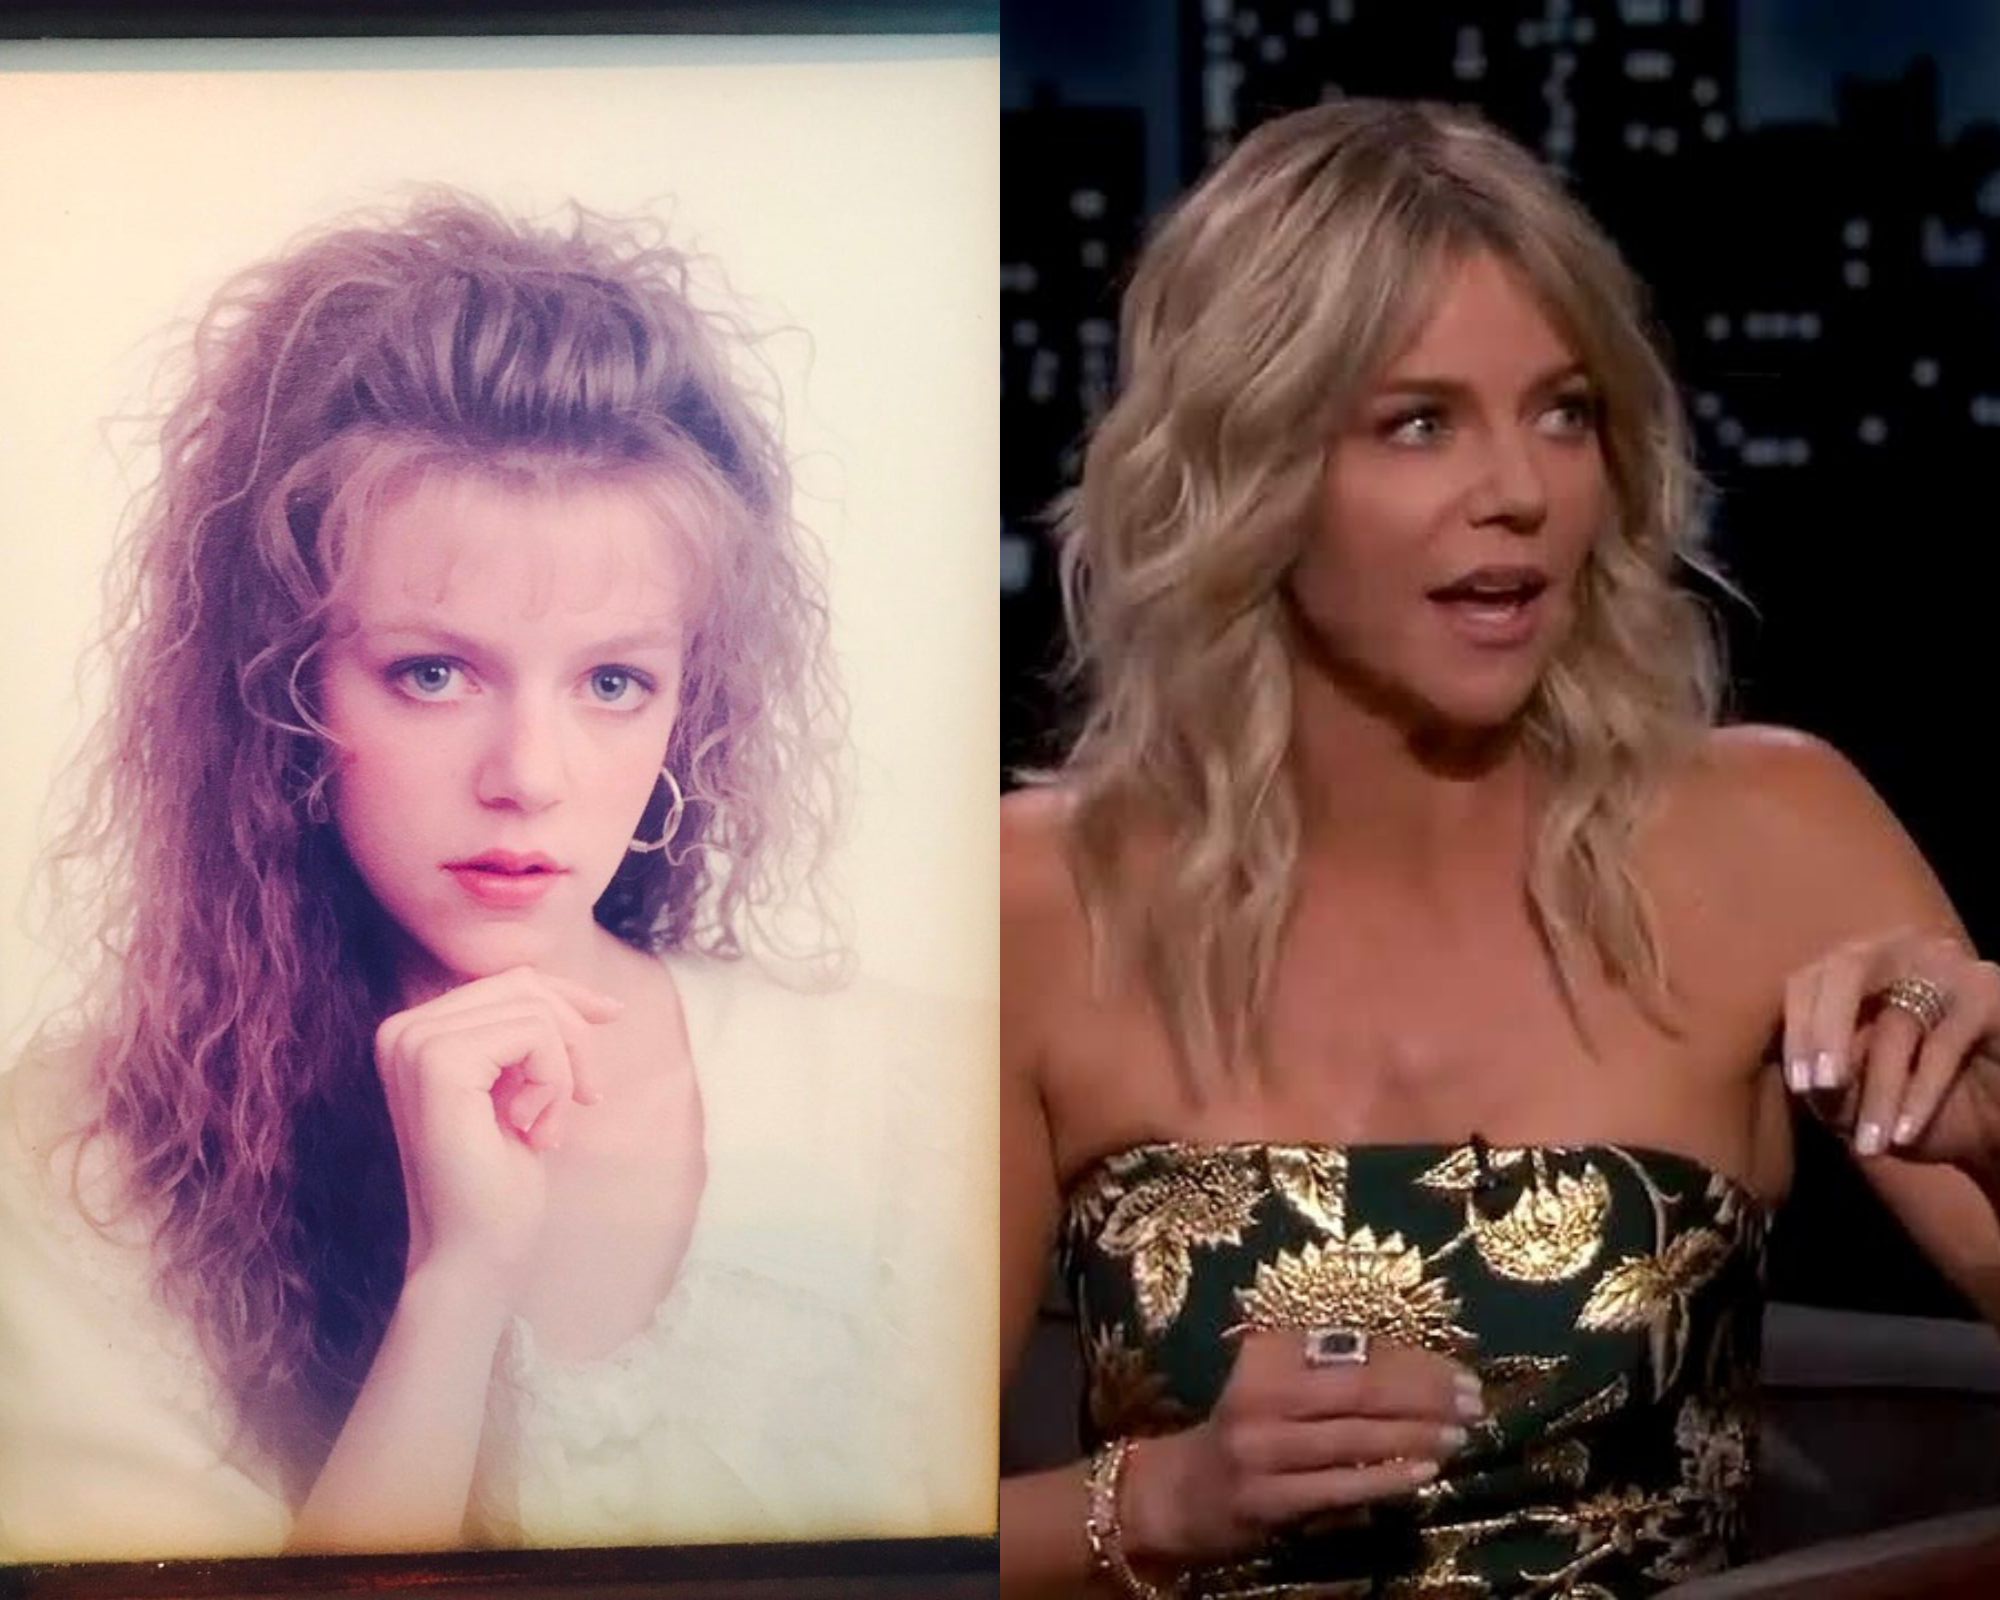 Kaitlin Olson before (L) and after (R) (Credits: Twitter/@KaitlinOlson)